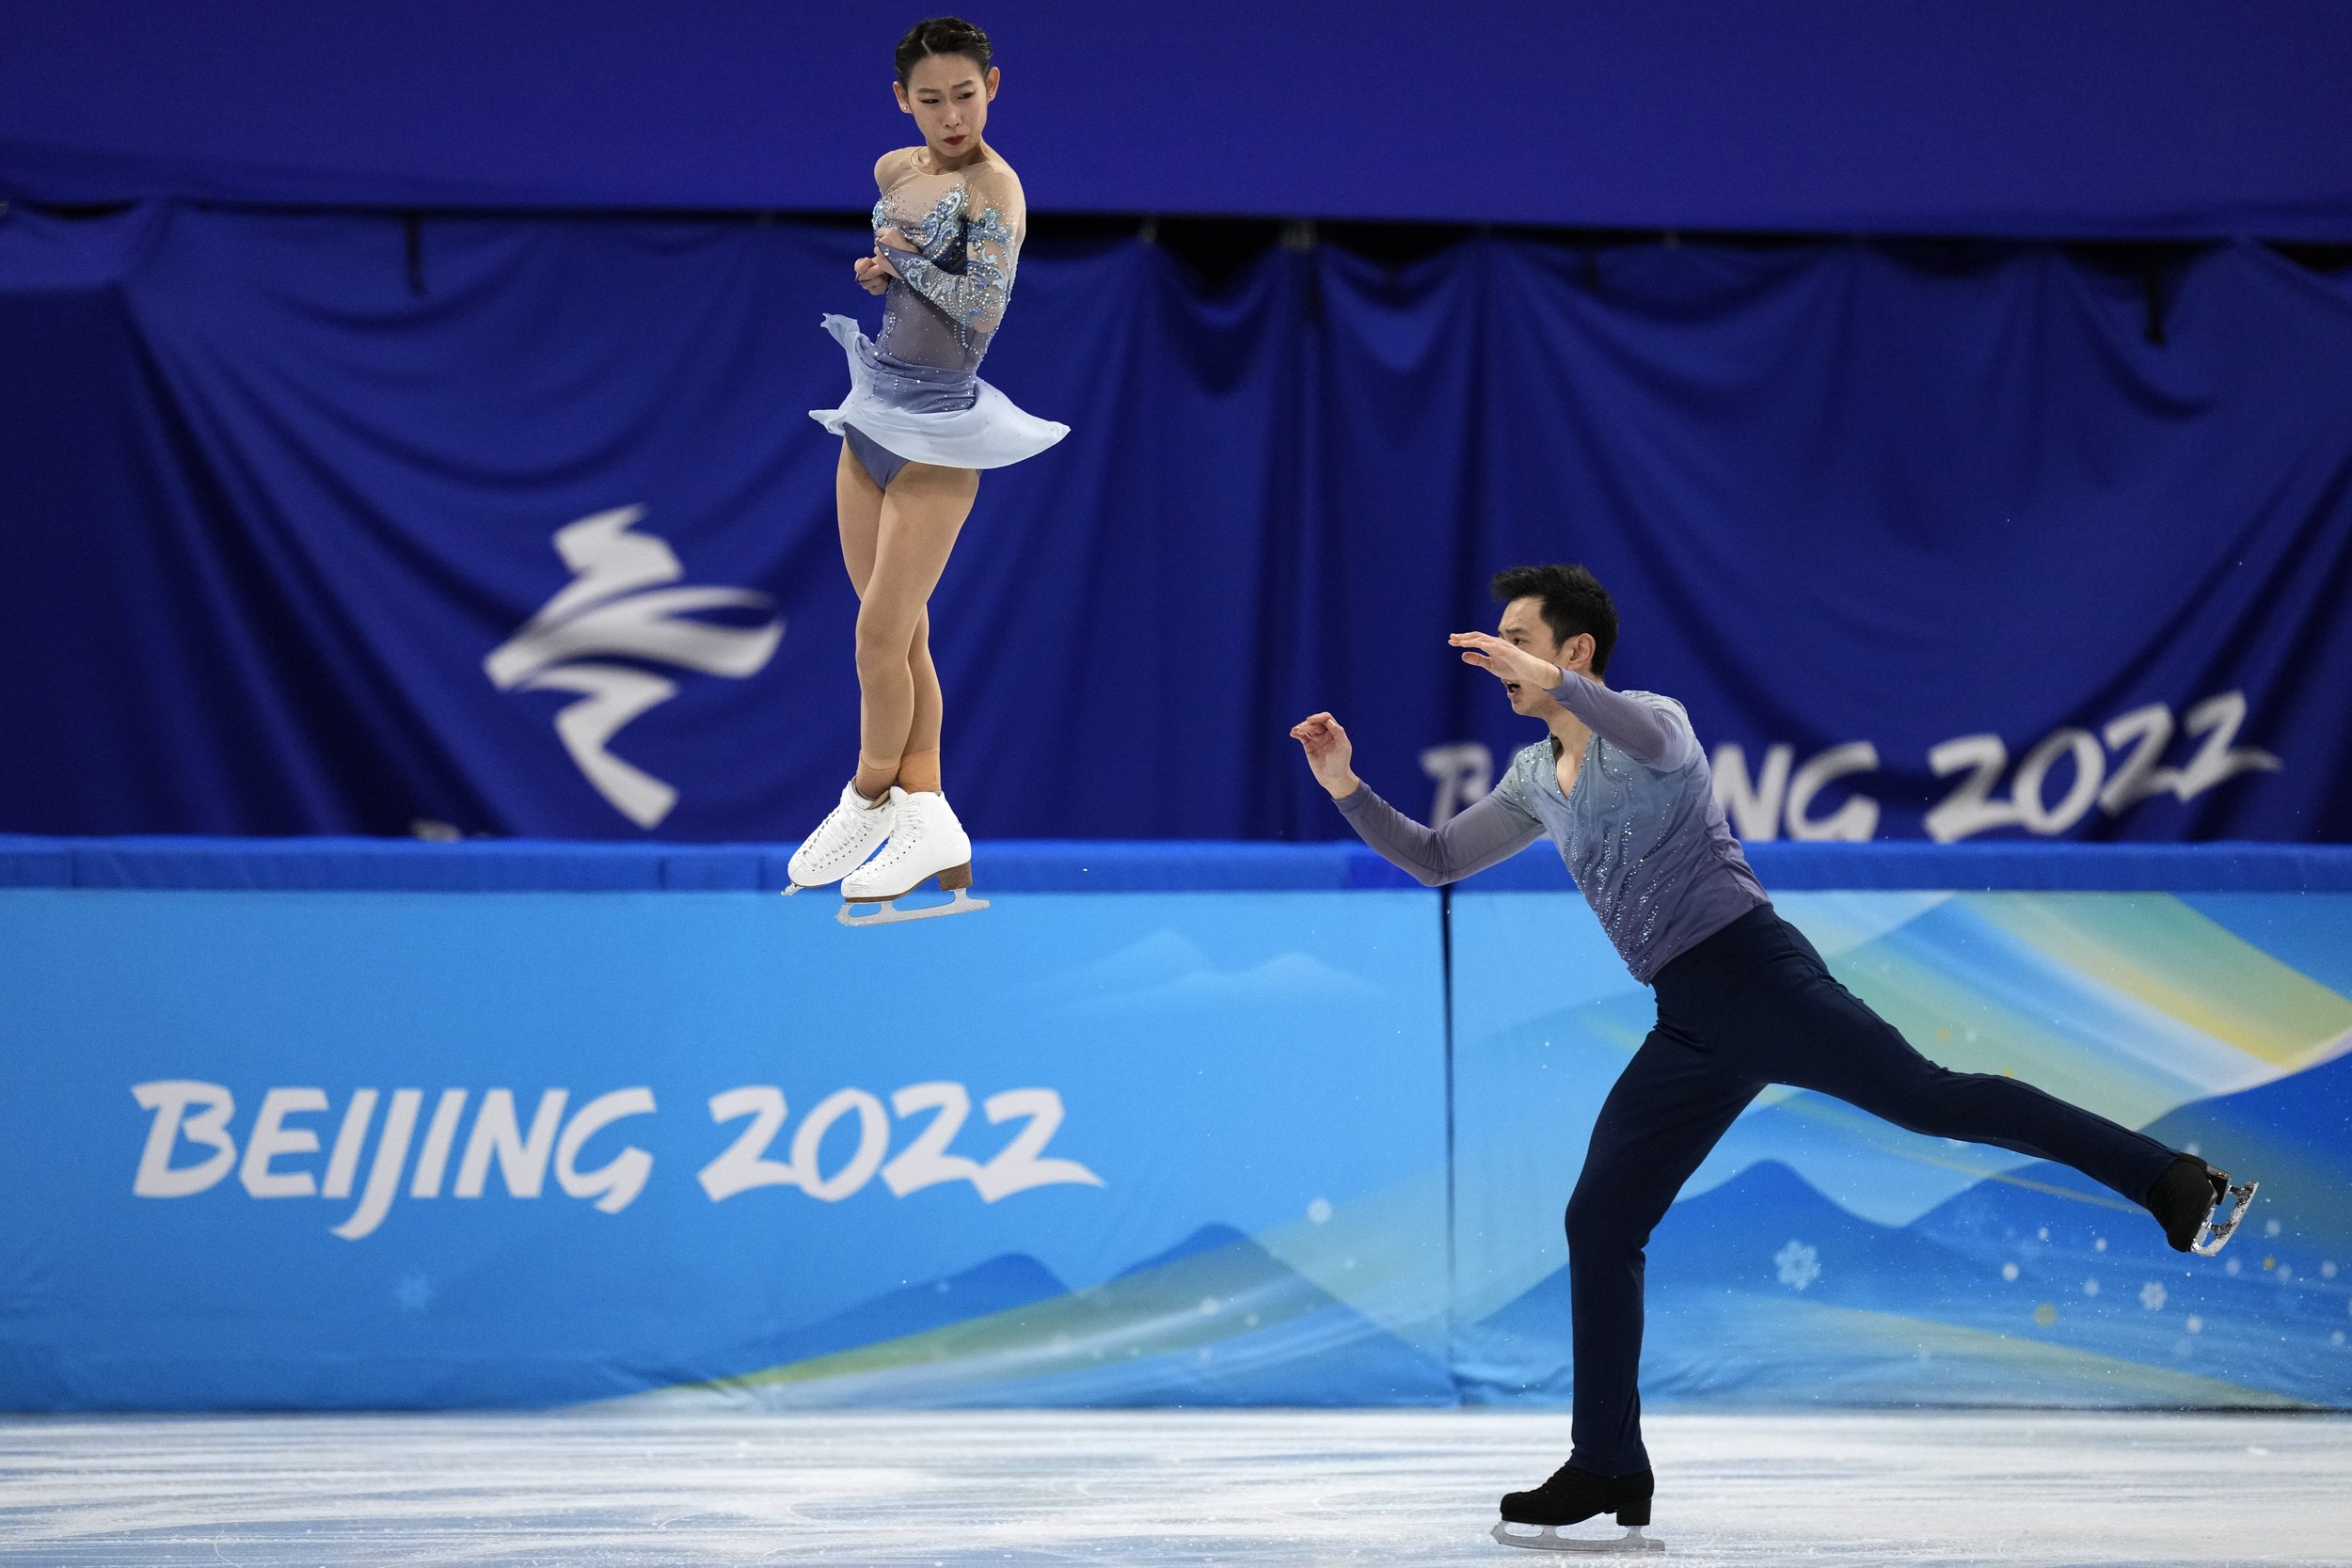  Peng Cheng and Jin Yang, of China, compete in the pairs short program during the figure skating competition at the 2022 Winter Olympics, Friday, Feb. 18, 2022, in Beijing. (AP Photo/Bernat Armangue) 